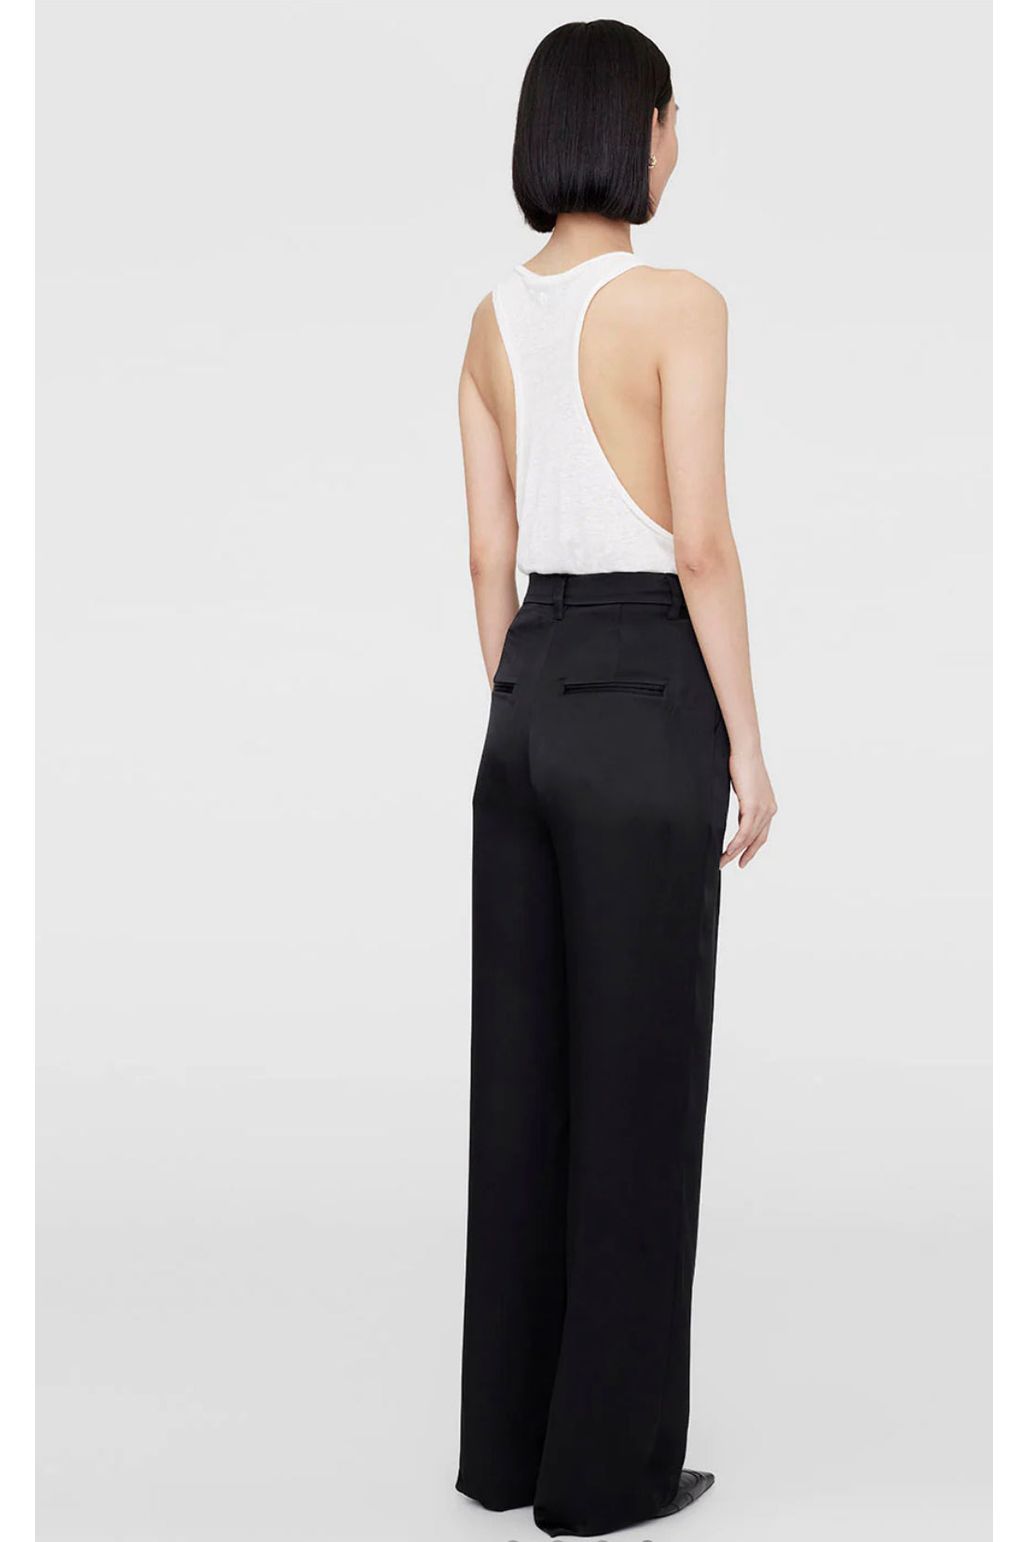 Carrie Pant in Black Silk by Anine Bing